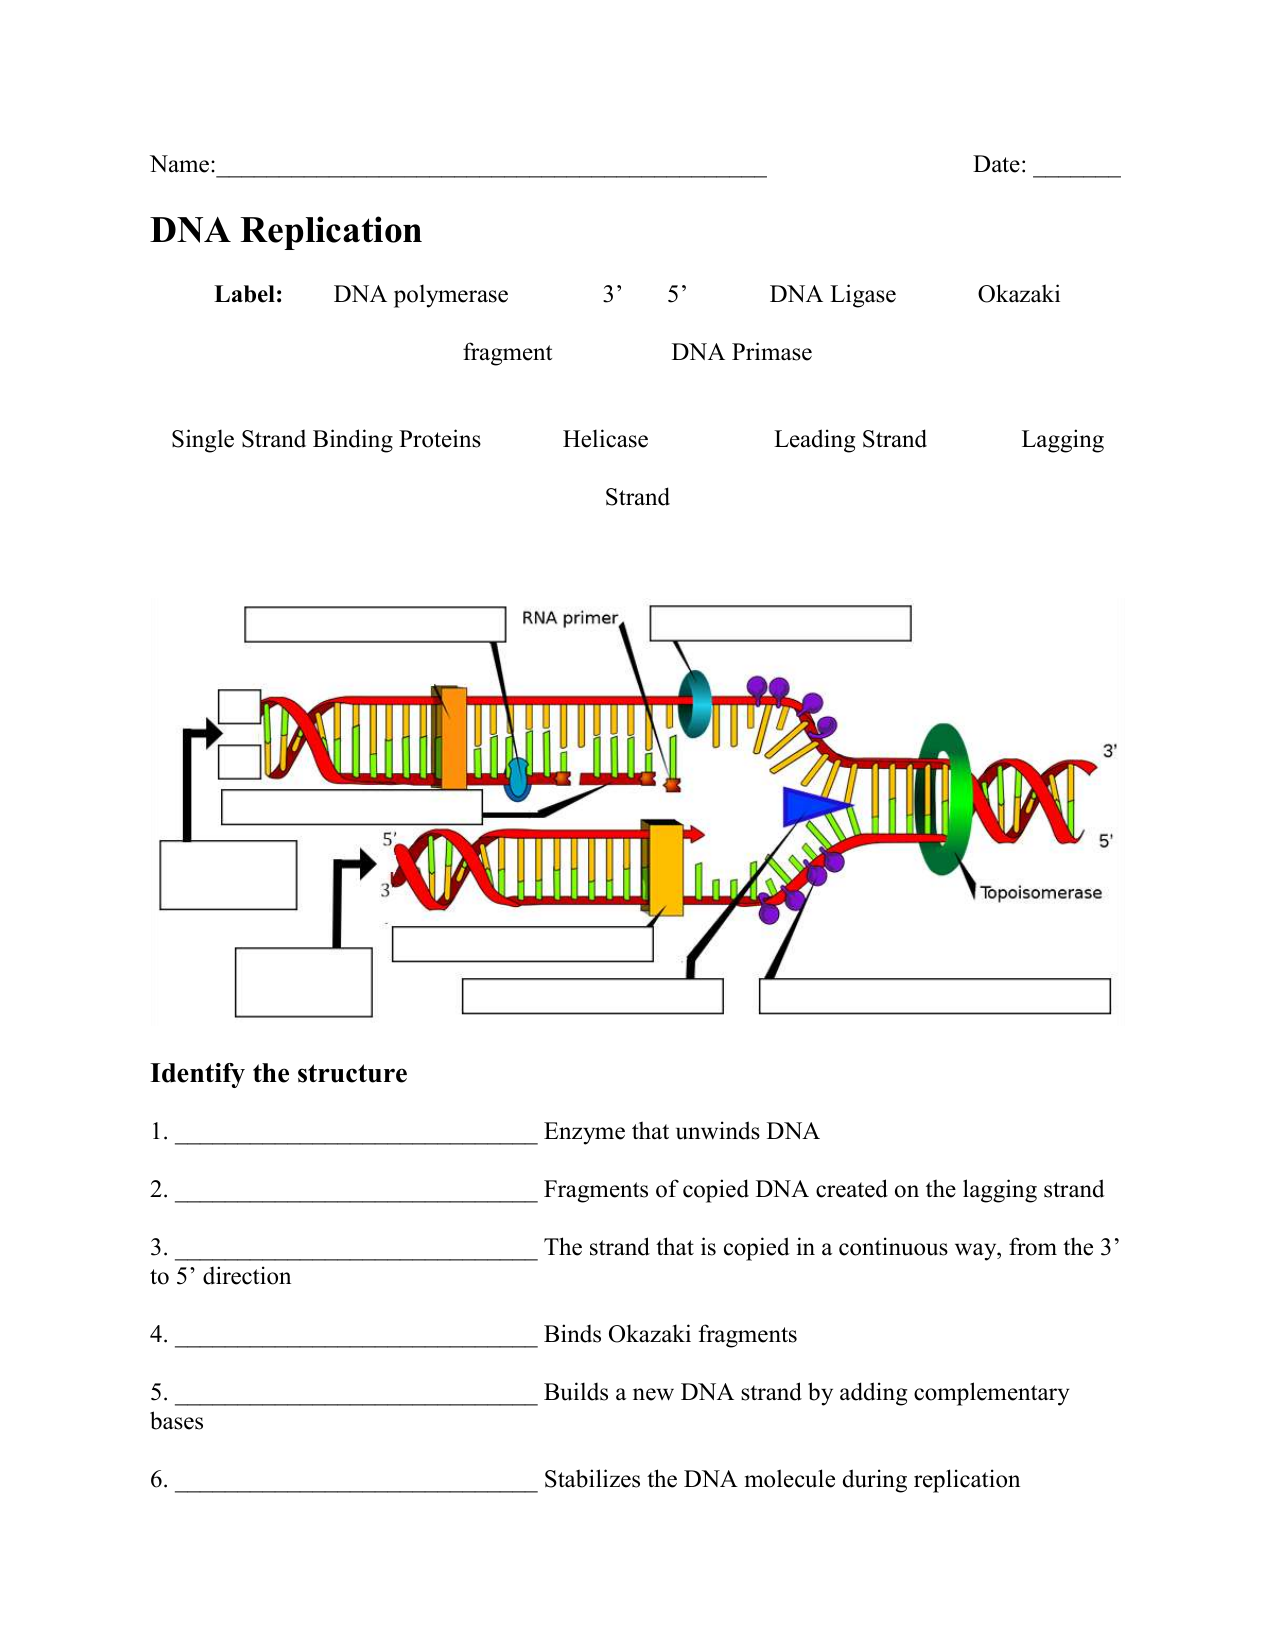 ️Semiconservative Dna Replication Worksheet Free Download Goodimg co